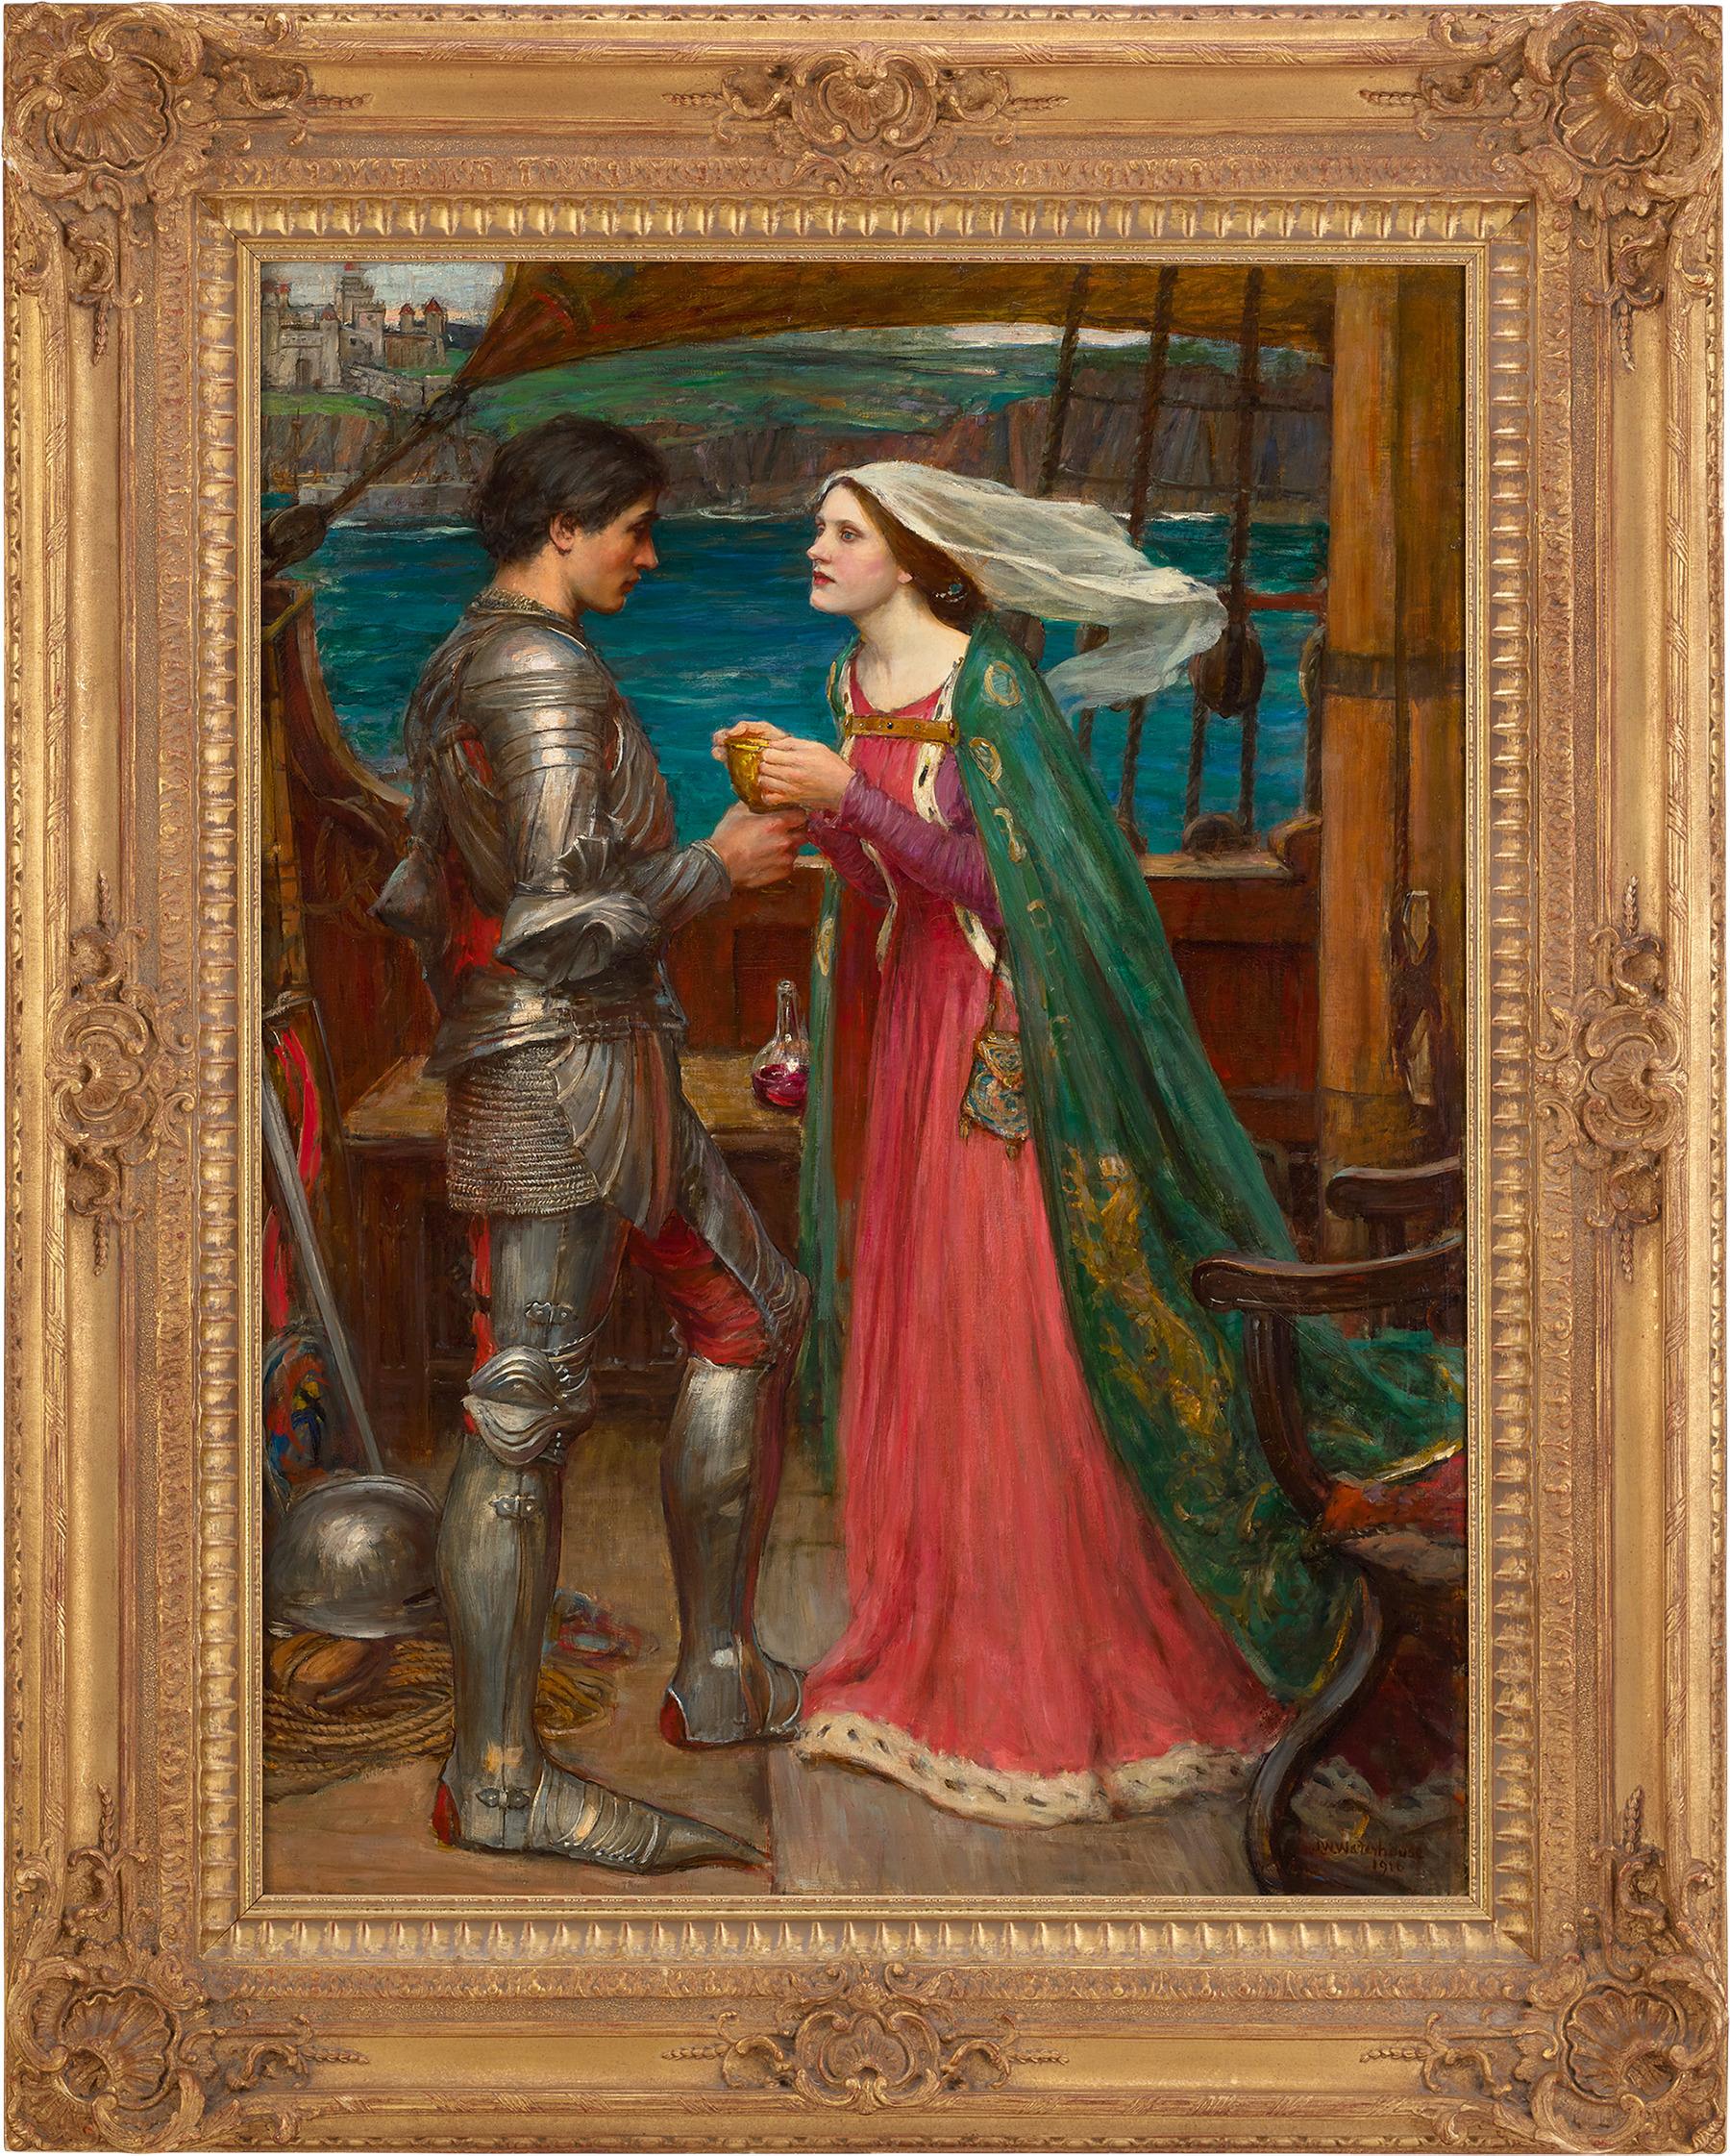 Tristram and Isolde by John William Waterhouse 1